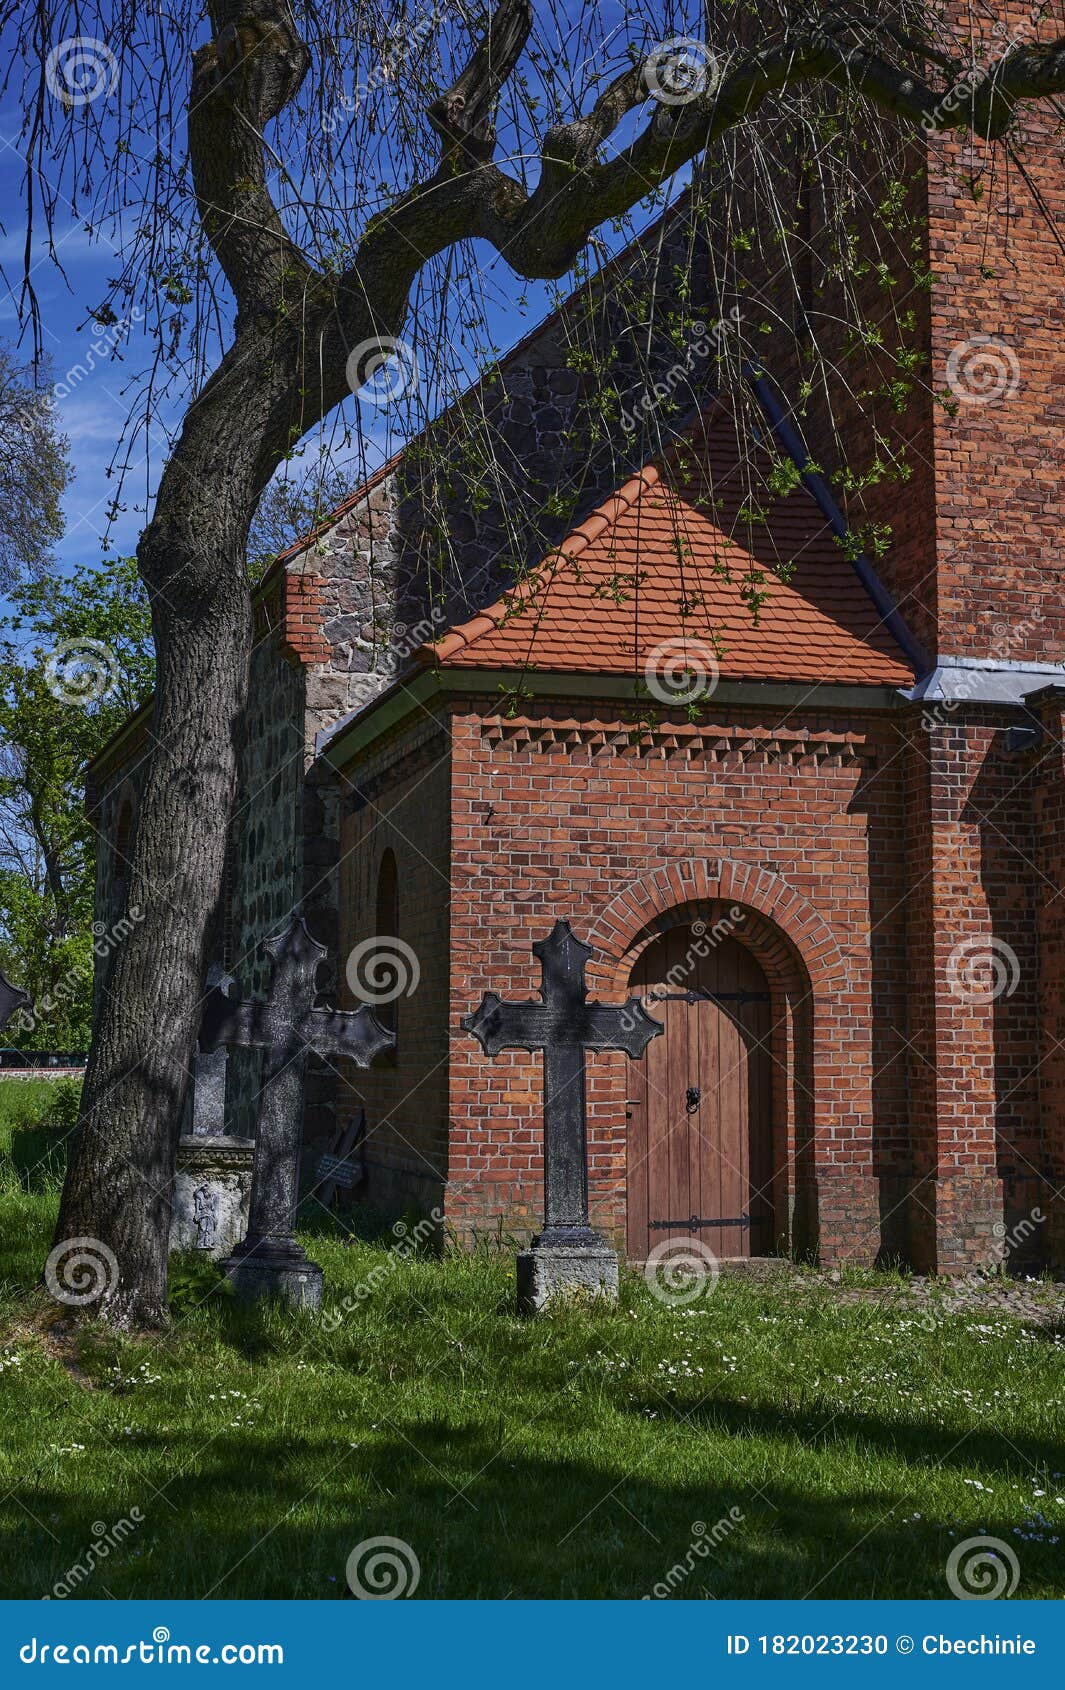 Building Details of a Medieval Village Church Stock Photo - Image of